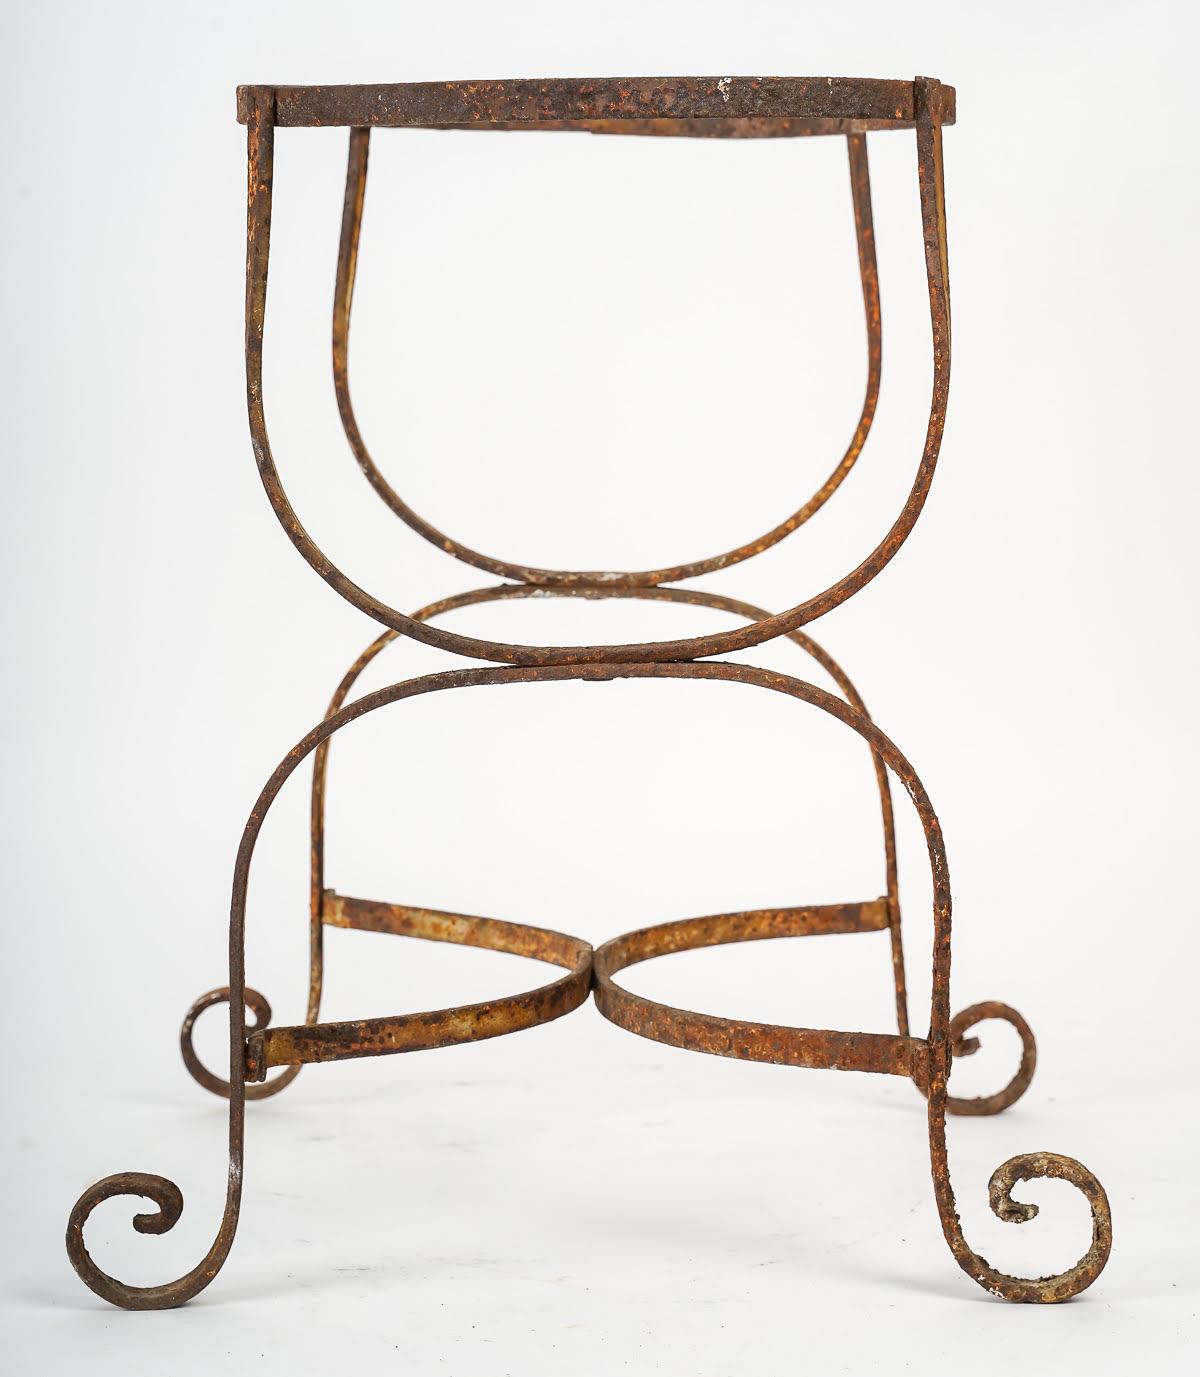 Wrought iron stand for earthenware chamber pot.

Wrought-iron chamber pot stand from the 19th century.
h: 43cm, w: 38cm, d: 25cm